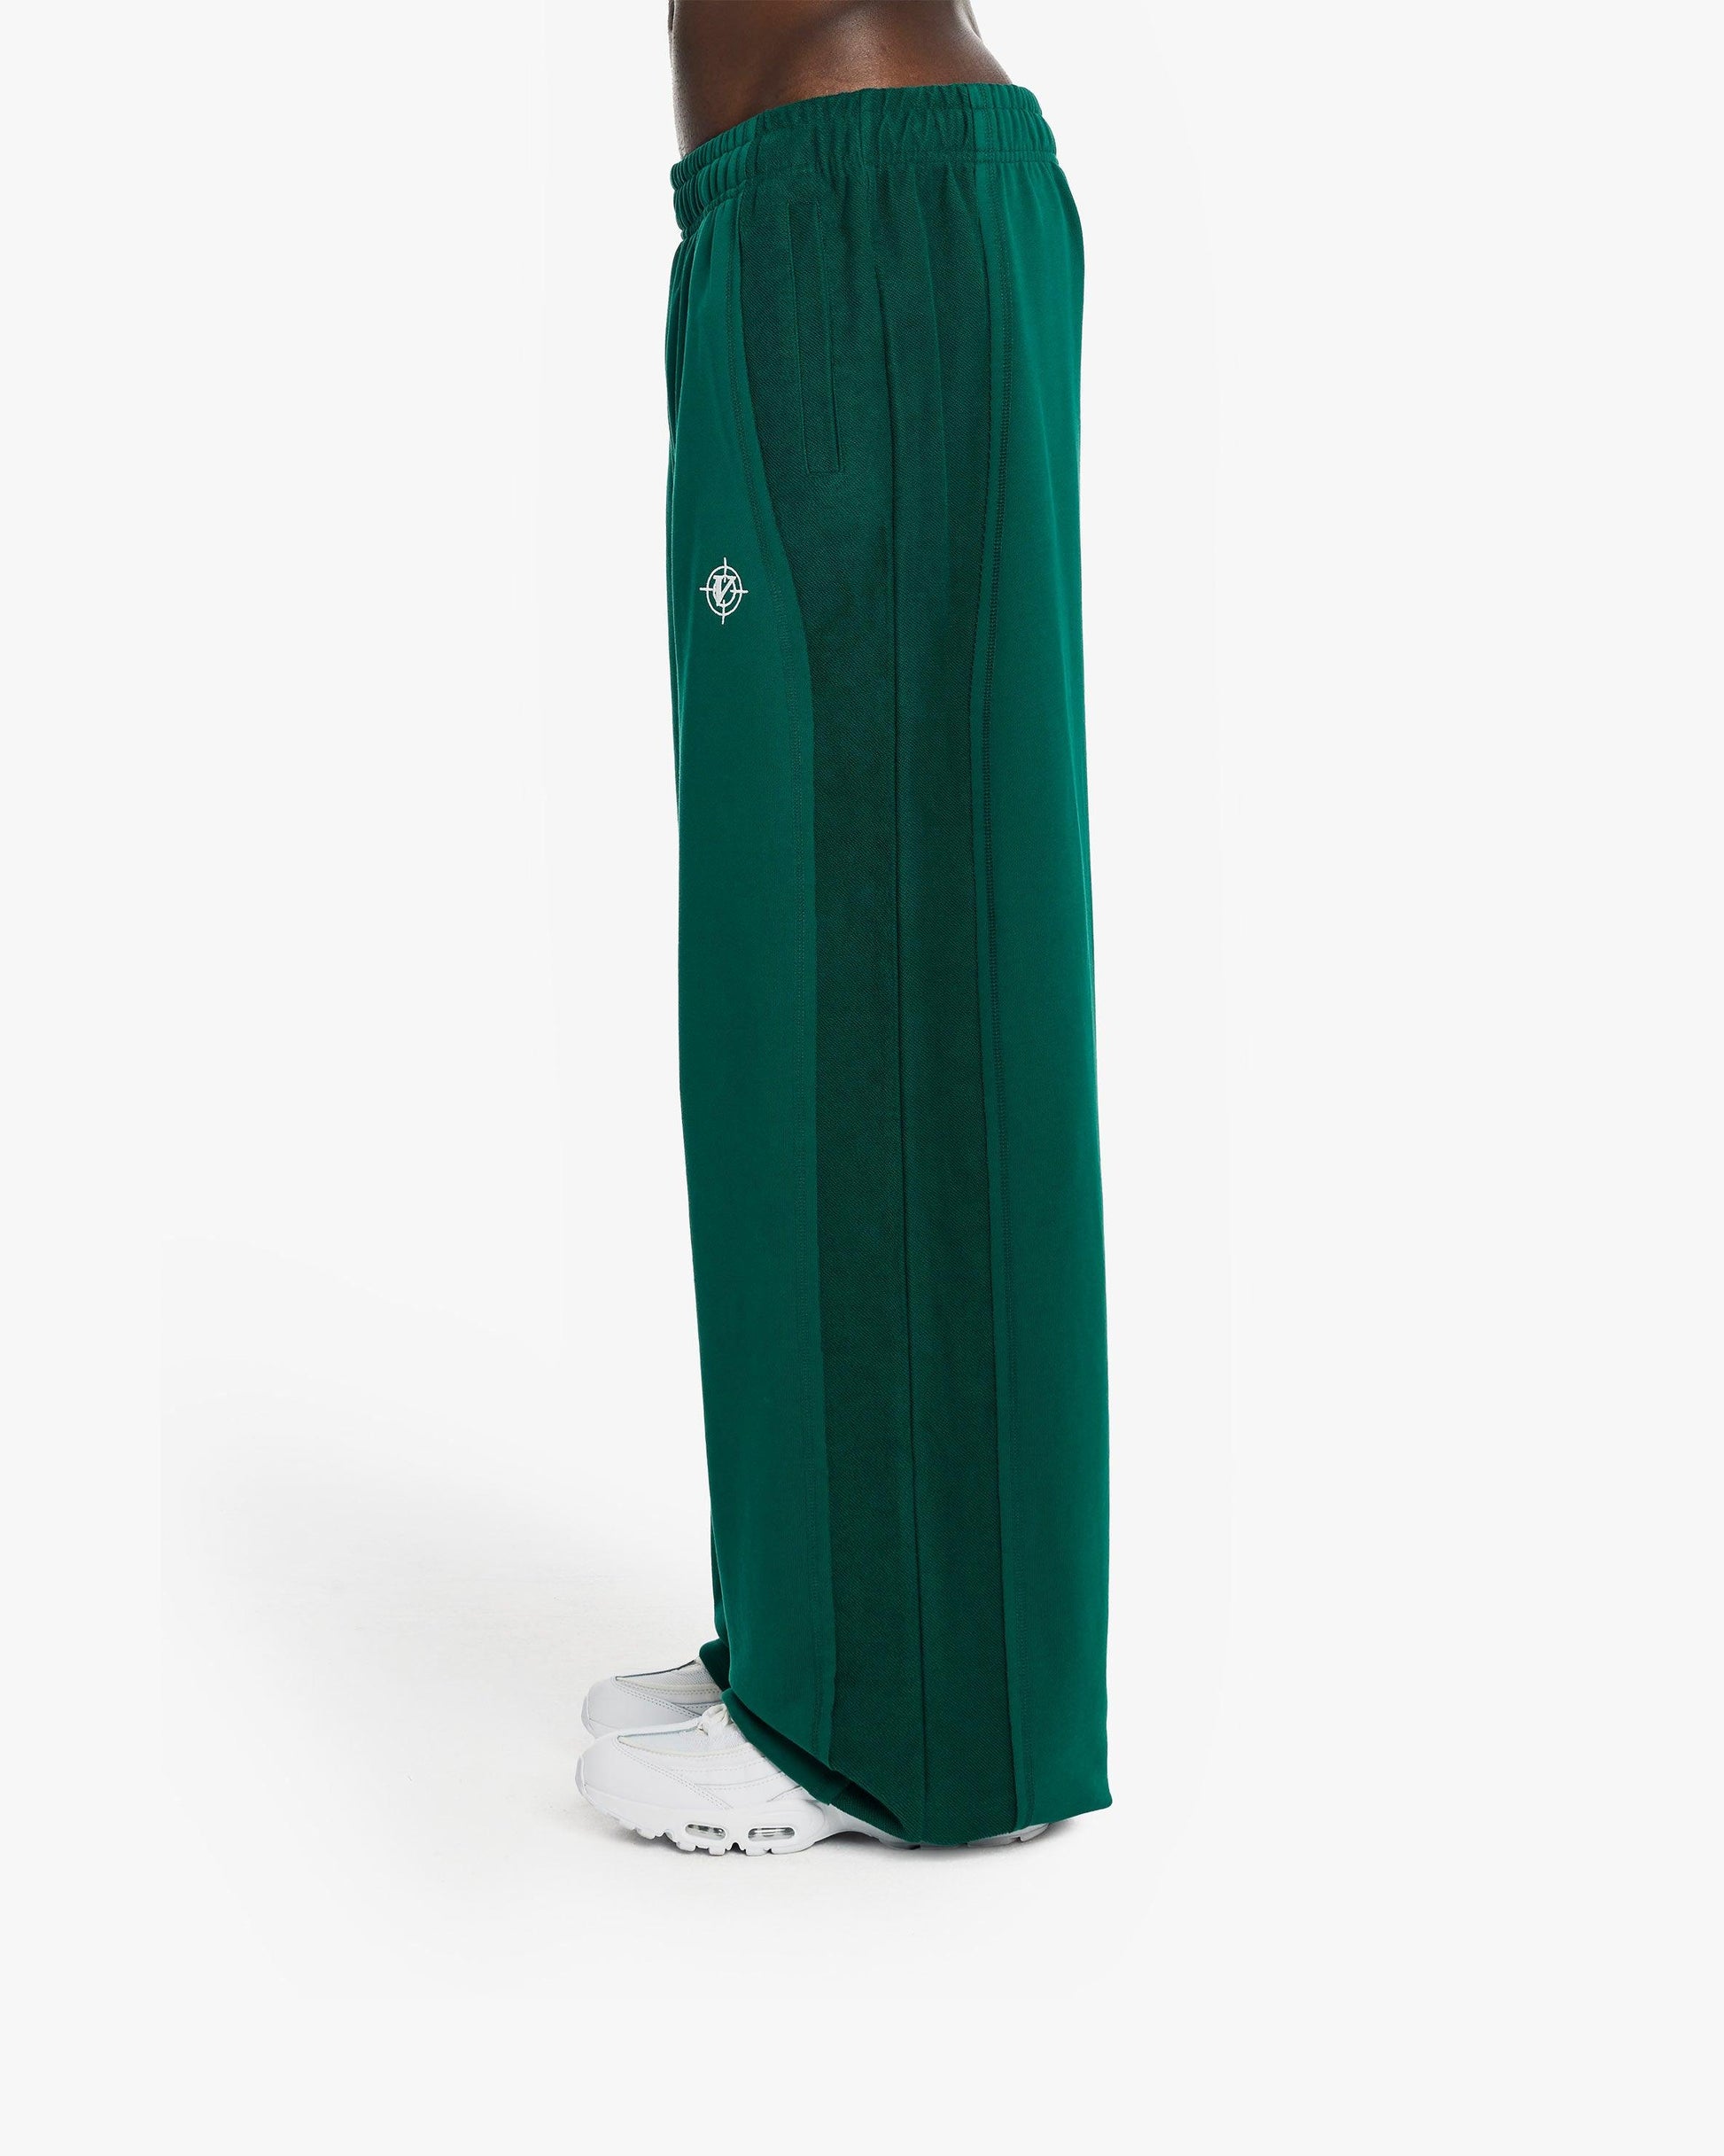 INSIDE OUT JOGGER FORREST GREEN - VICINITY